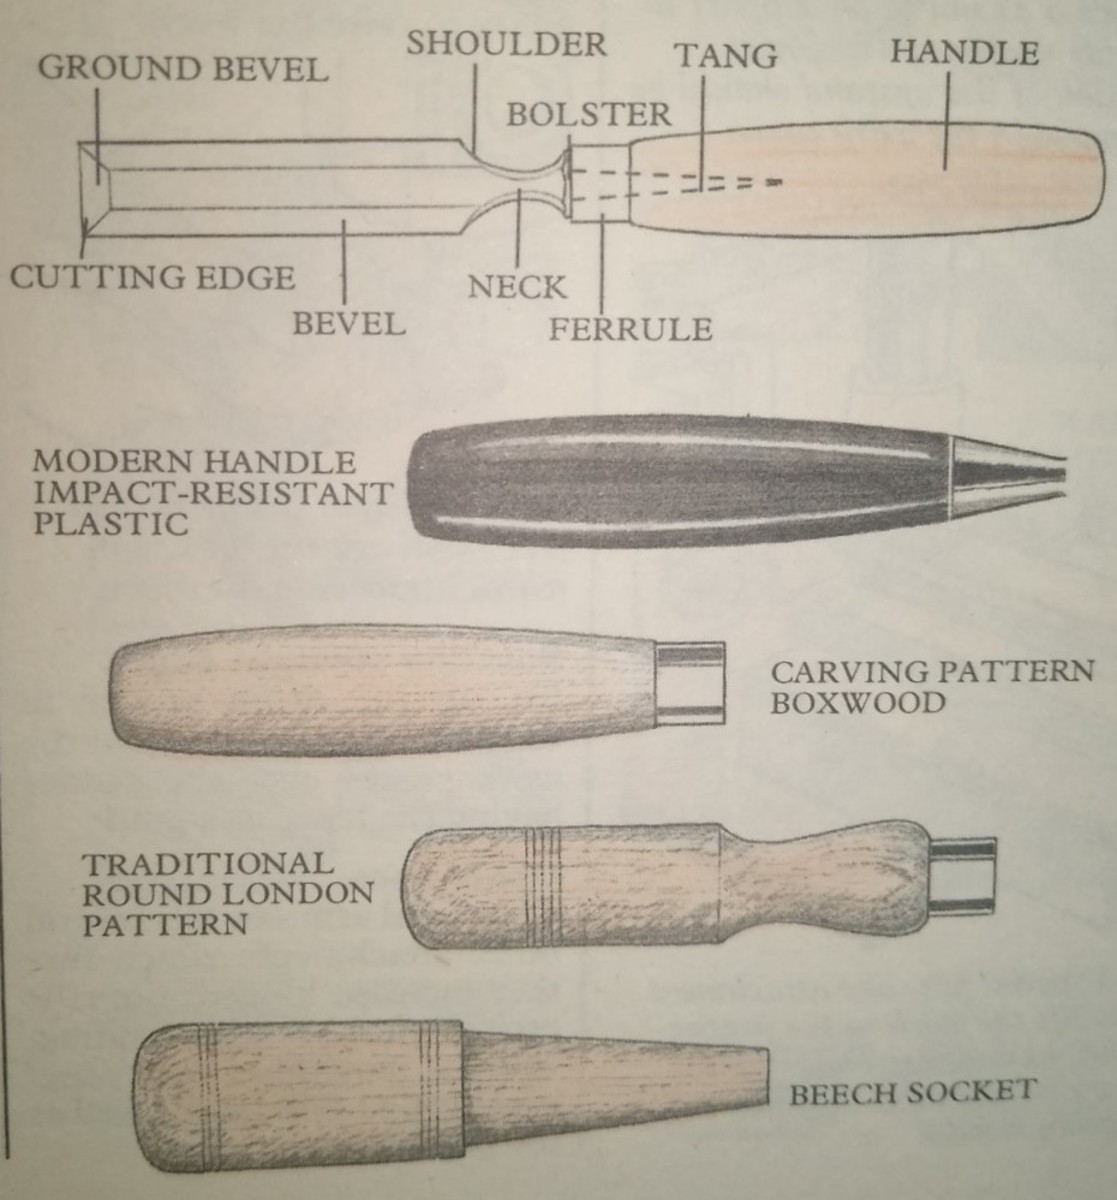 Complete Guide on the Different Types of Chisels & Gouges